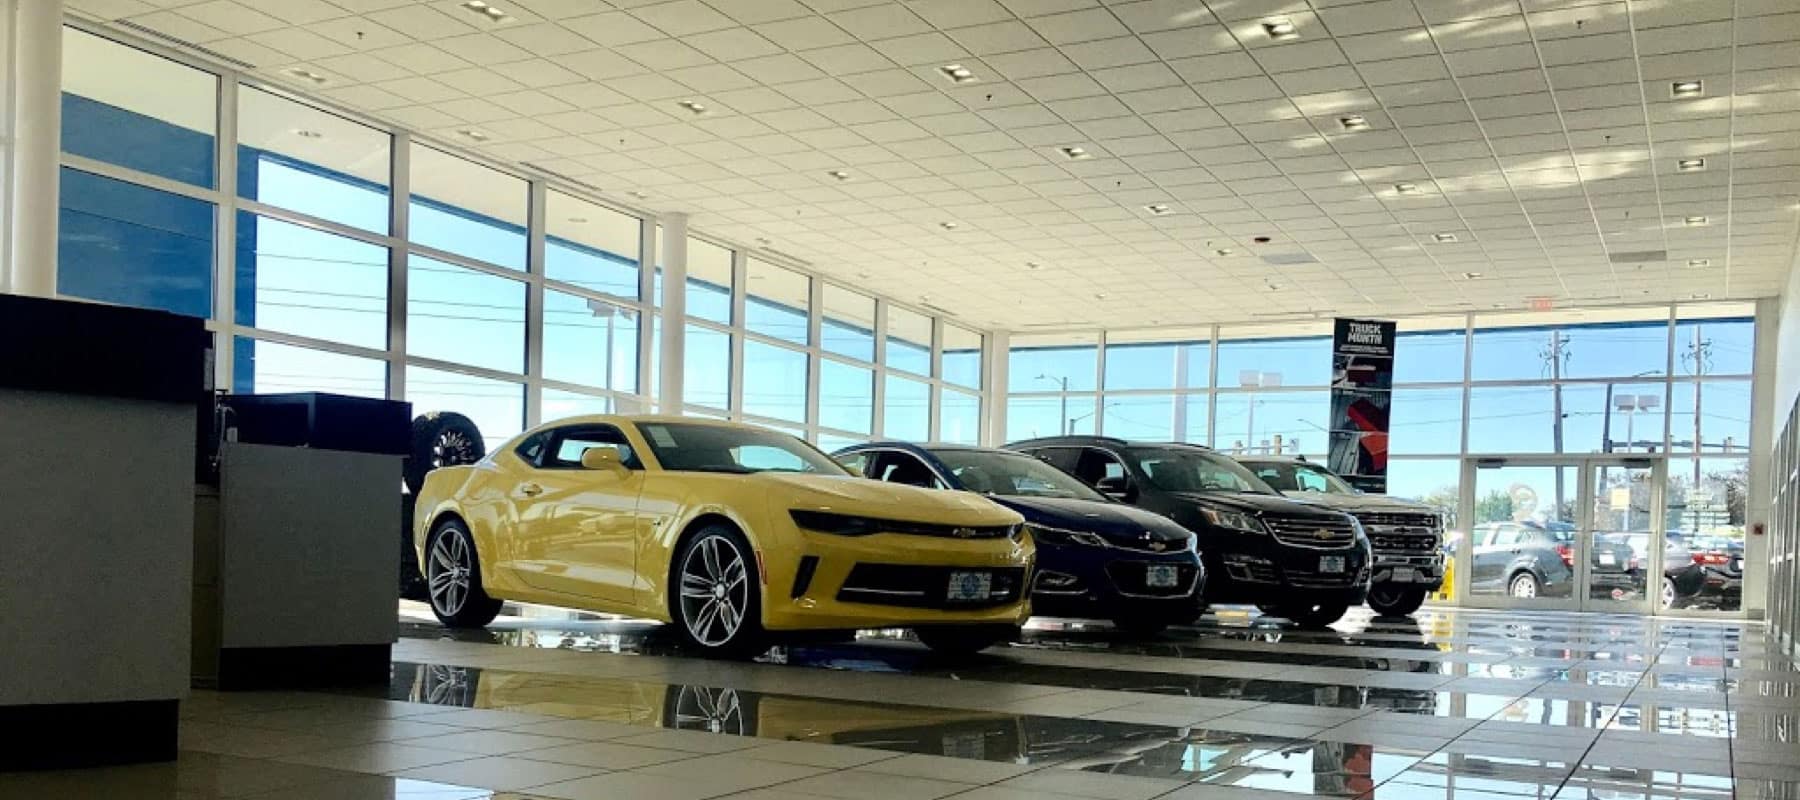 Line of cars in dealership